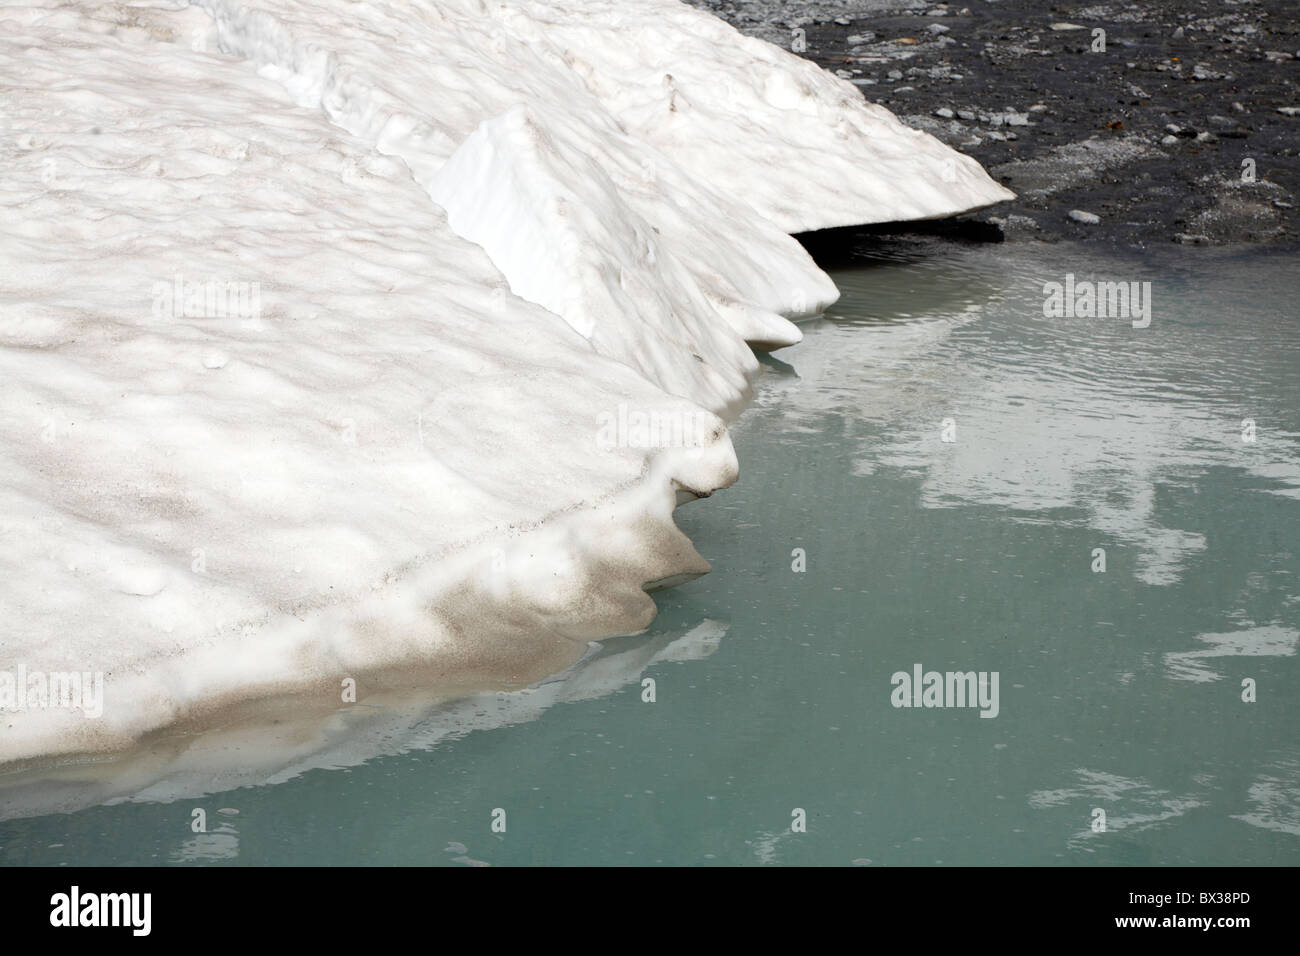 Melting snow and ice during summer at the Rettenbach Glacier, Ötztal, Austria in July Stock Photo